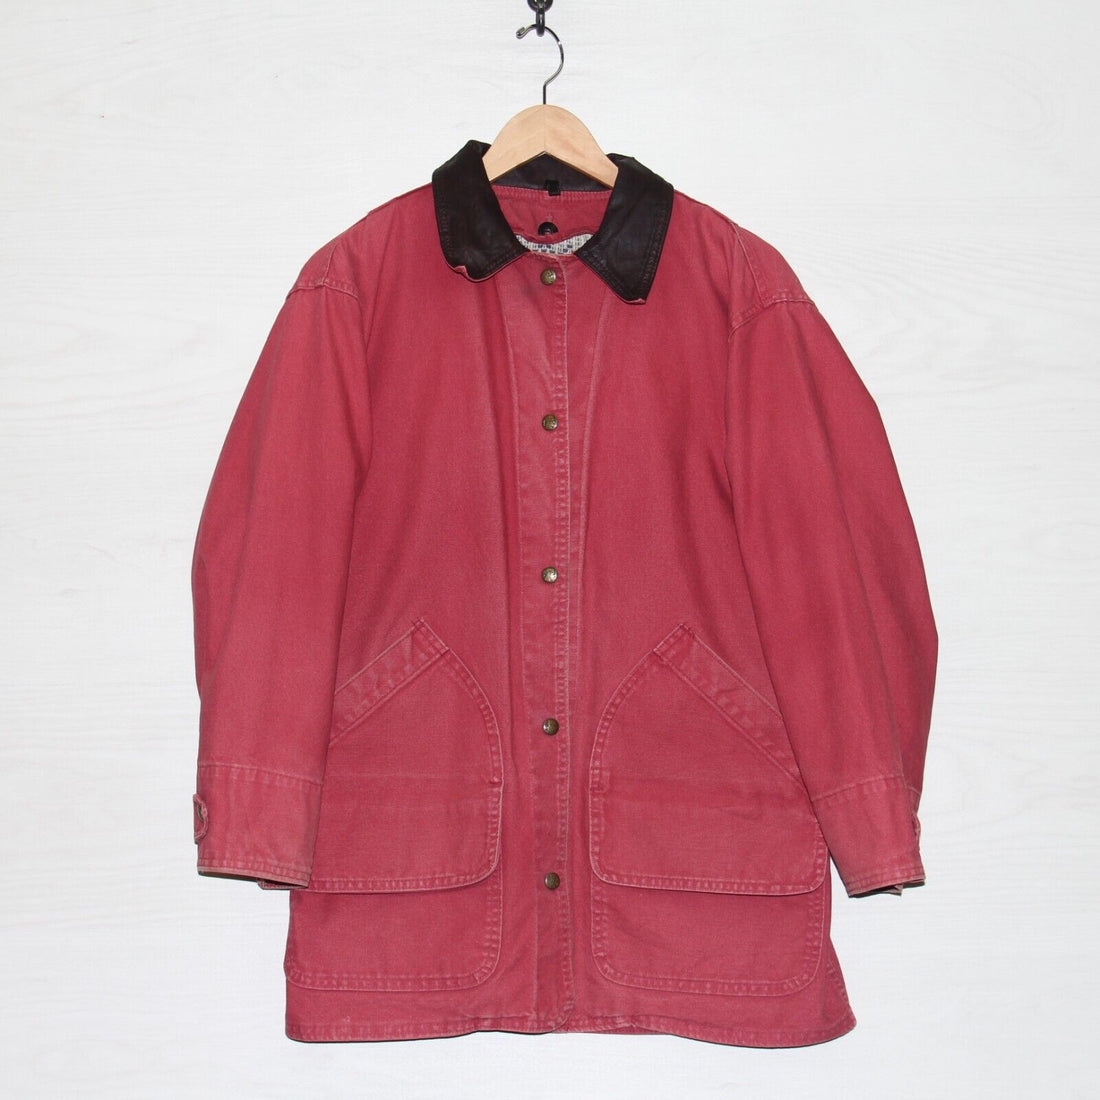 Vintage Woolrich Barn Work Coat Jacket Size Small Red 90s Made USA